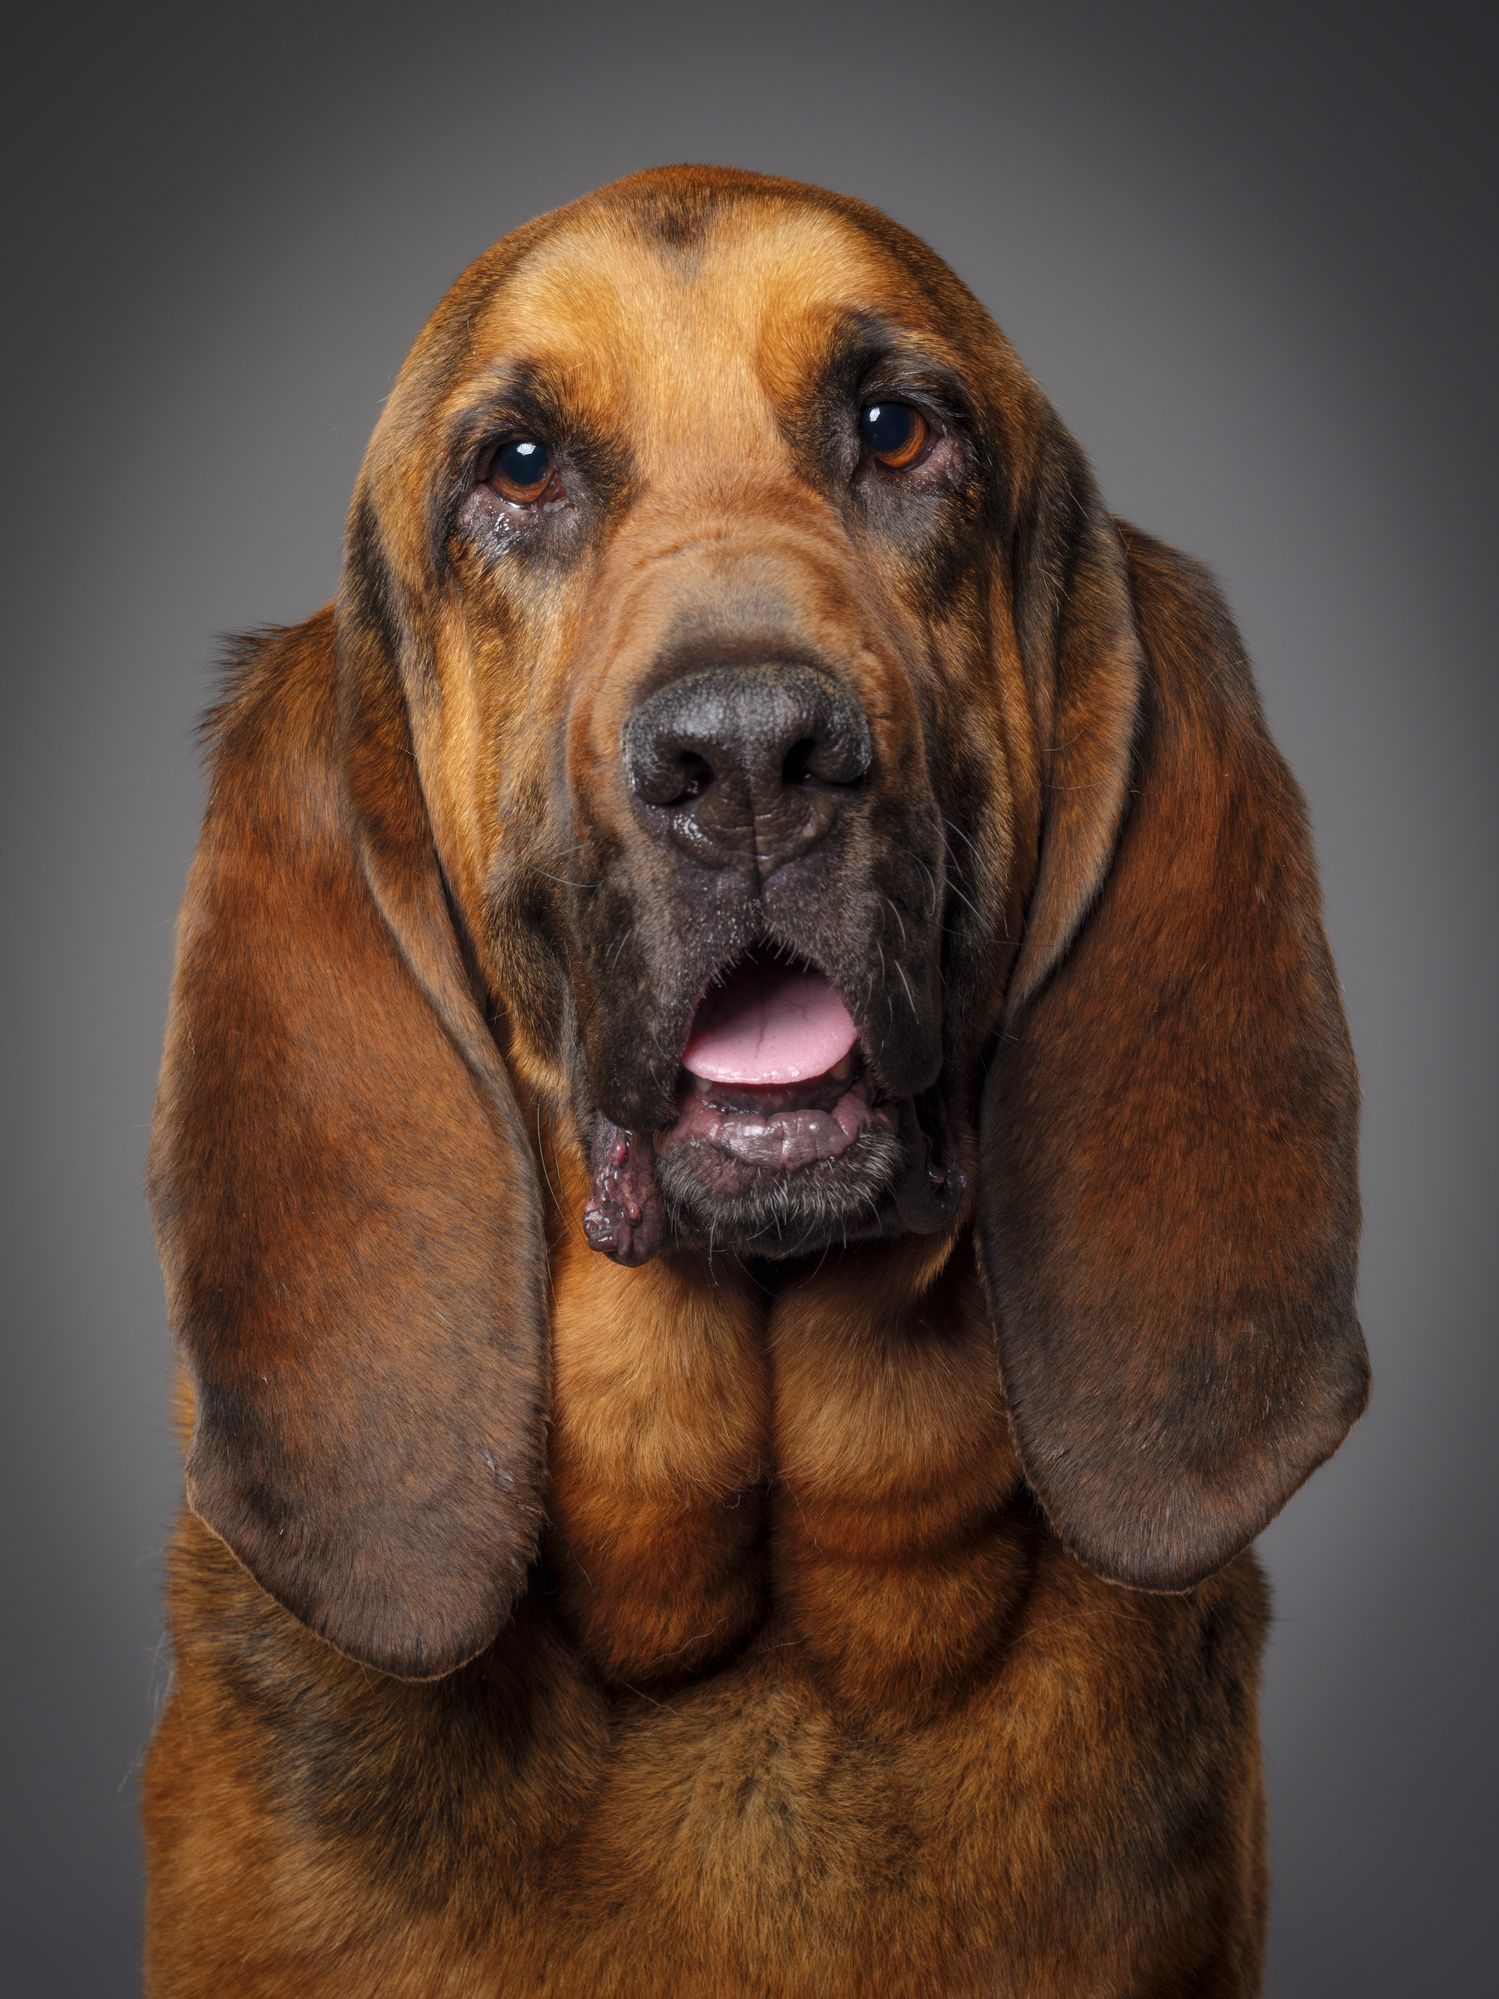 15 Classic Hound Dog Breeds (With Pictures) – Dogster